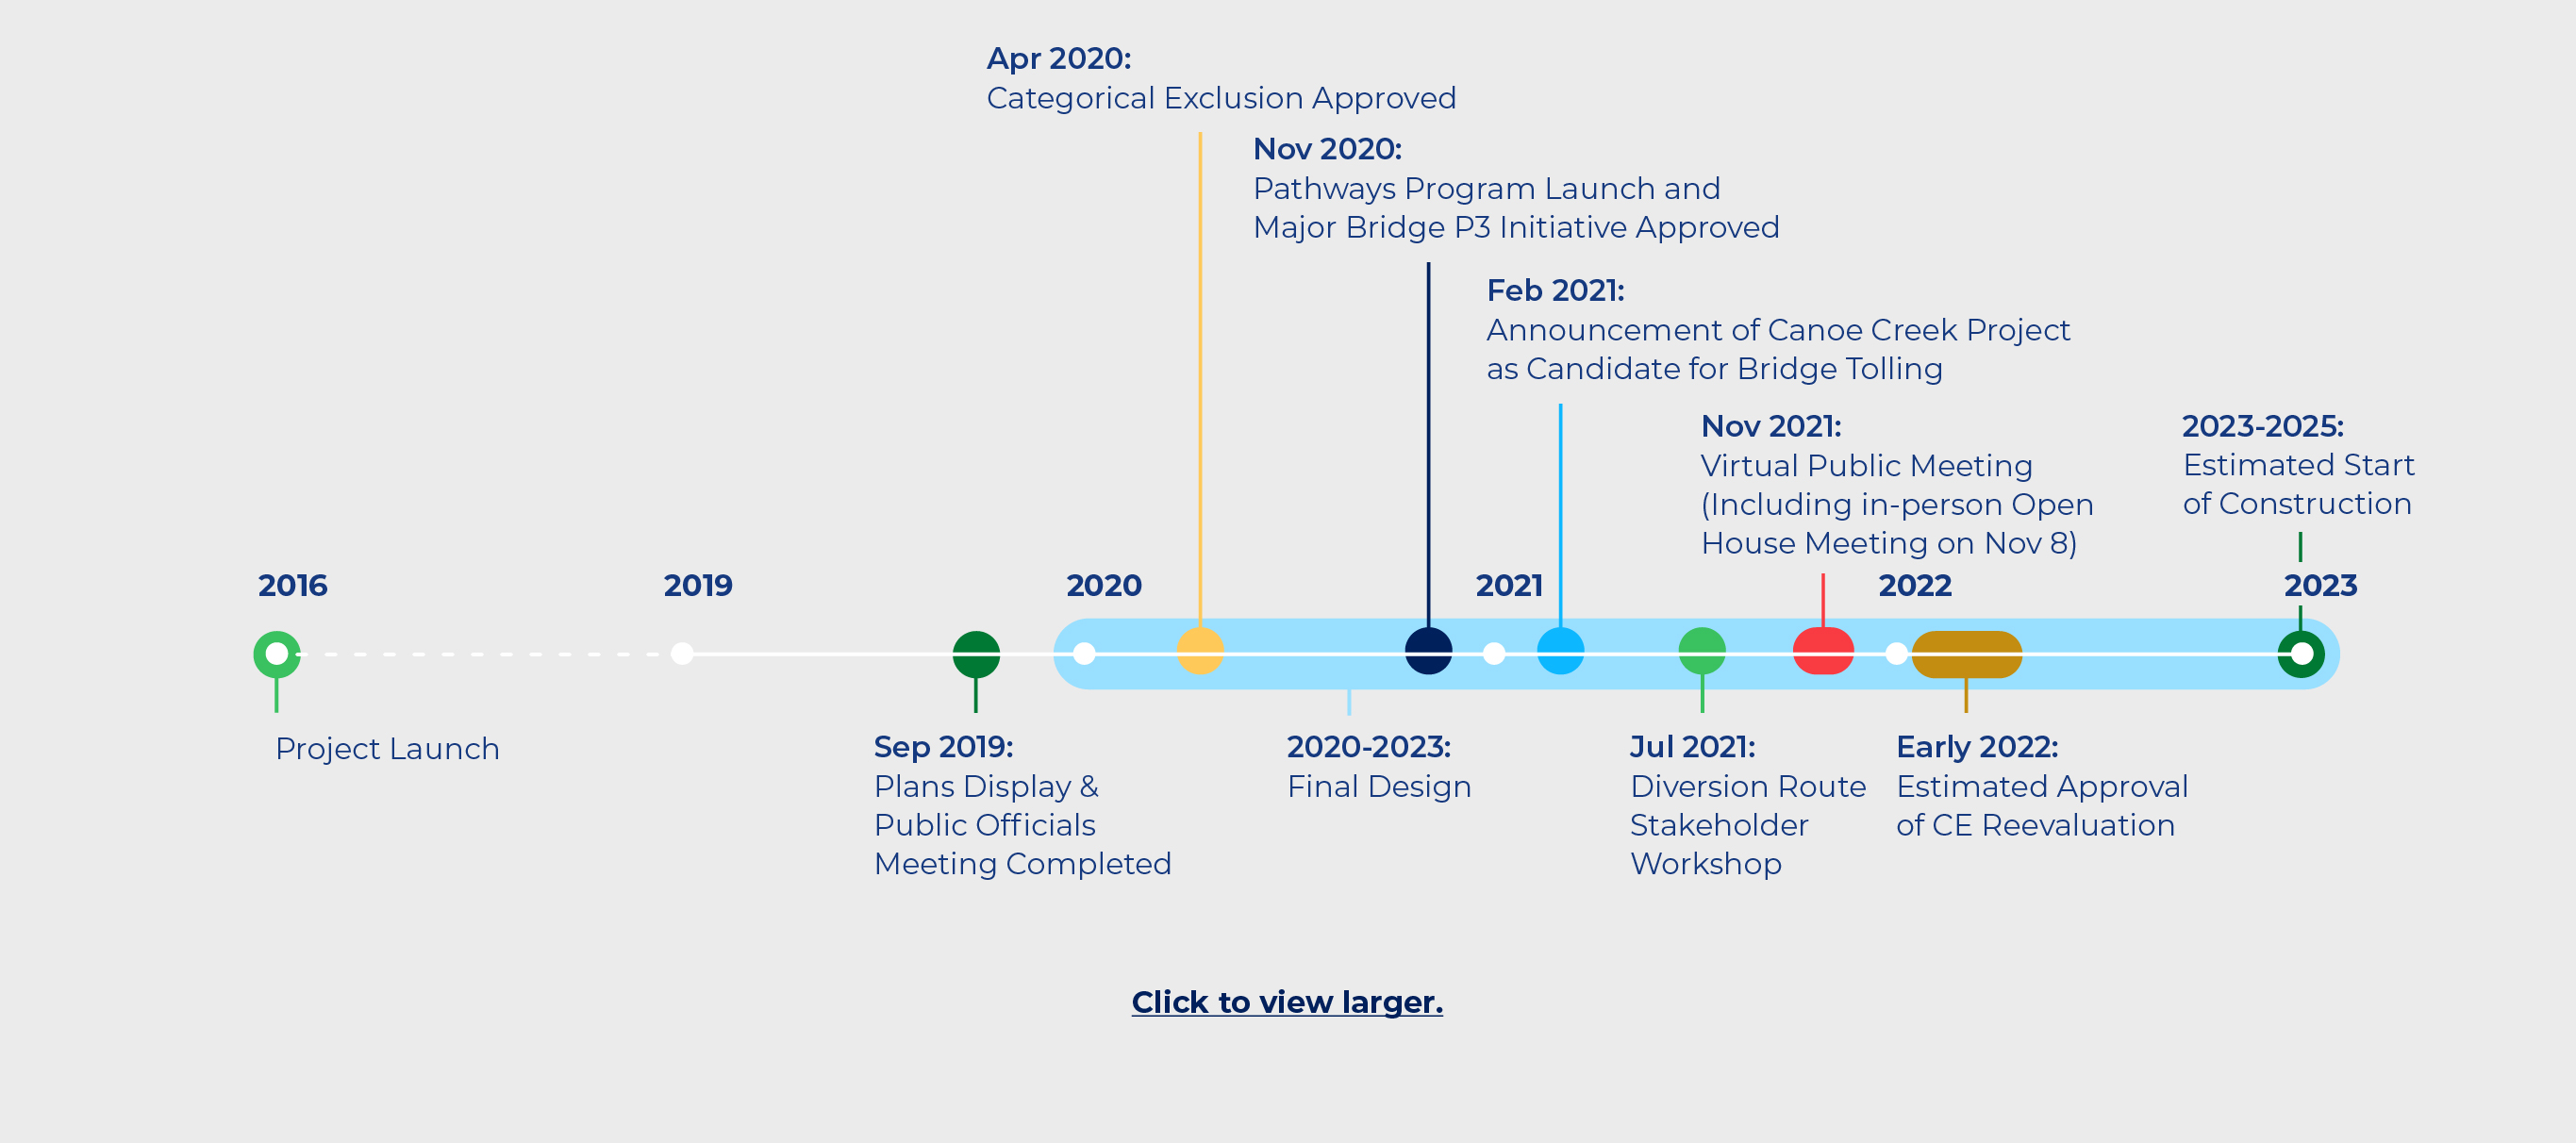 Timeline: Project launch in 2016. Plans display and public officials meeting in September 2019. Final Design from 2020-2023. Categorical exclusion approved in April 2020. Pathways Program launch and Major Bridge P3 Initiative approved in November 2020. Announcement of Canoe Creek Project as candidate for bridge tolling in February 2021. Diversion route stakeholder workshop in July 2021. Virtual public meeting (including in-person open house meeting on Nov. 8) in November 2021. Estimated approval of CE reevaluation in early 2022. Estimated start of construction in 2023-2025.